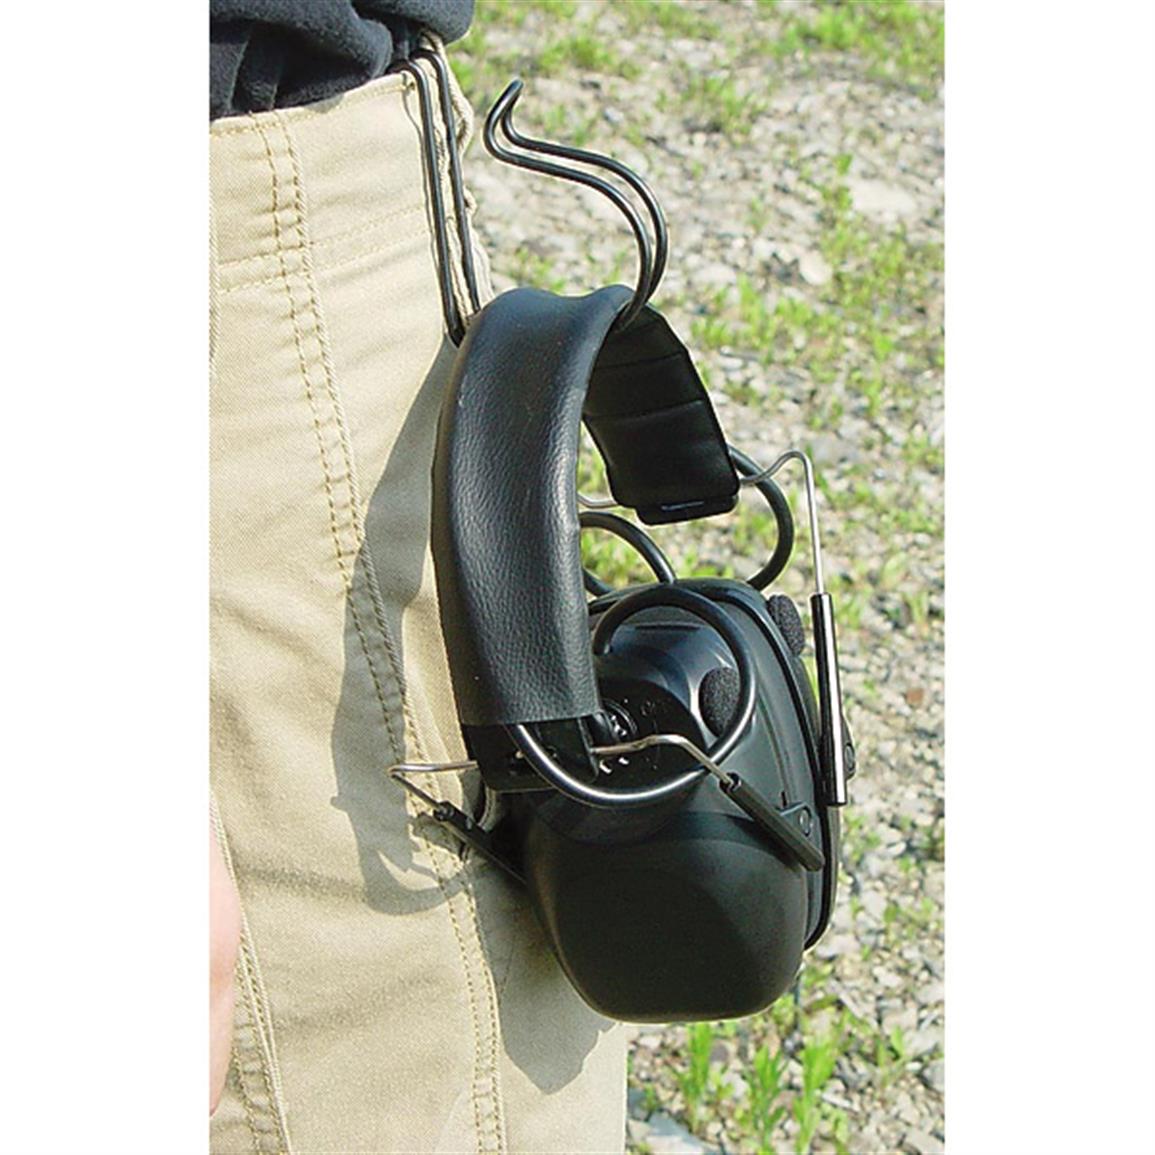 HQ ISSUE Walker's Patriot Series Electronic Ear Muffs 703297, Hearing  Protection at Sportsman's Guide